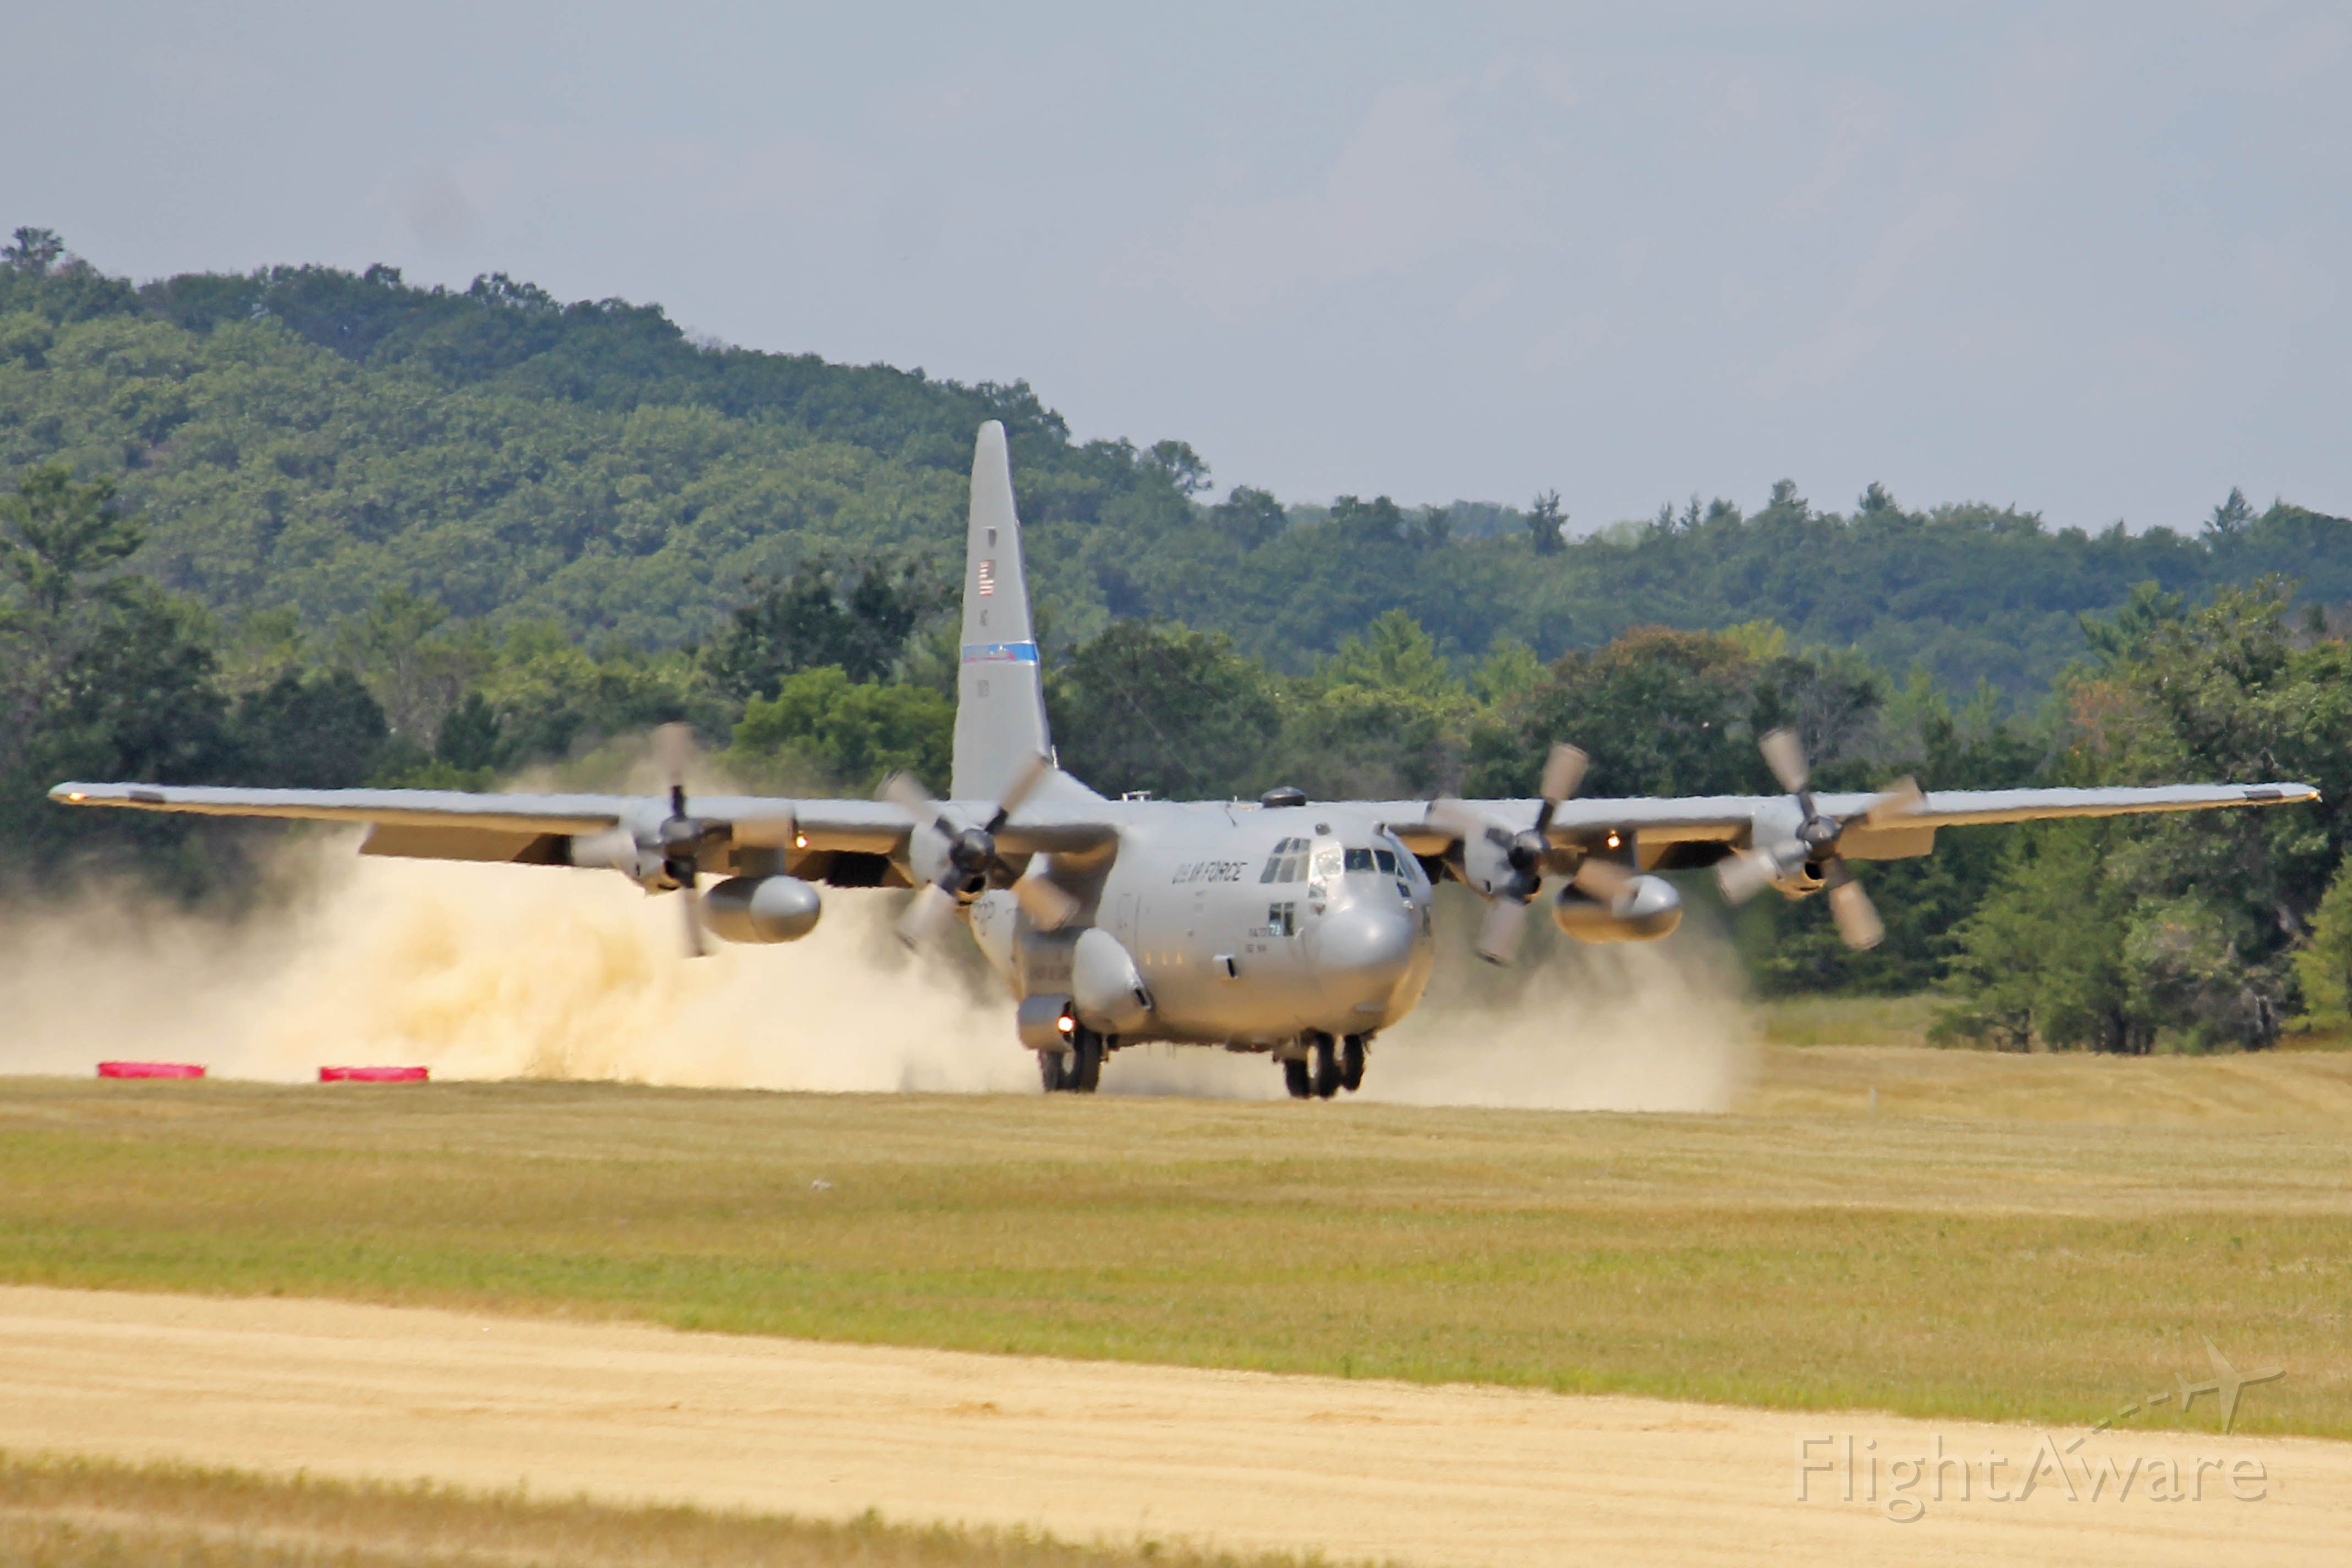 Lockheed C-130 Hercules (79-0473) - A USAF Lockheed C-130, 79-0473, cn 382-4852, from the 152d Airlift Wing (AW)–the High Rollers, Reno, Nevada ANG landing at Fort McCoy/Young Tactical Landing Site-Air Assault Strip, Ft. McCoy, (WS20) USA – WI, during Warrior Exercise 86-13-01 (WAREX) on 17 Jul 2013.